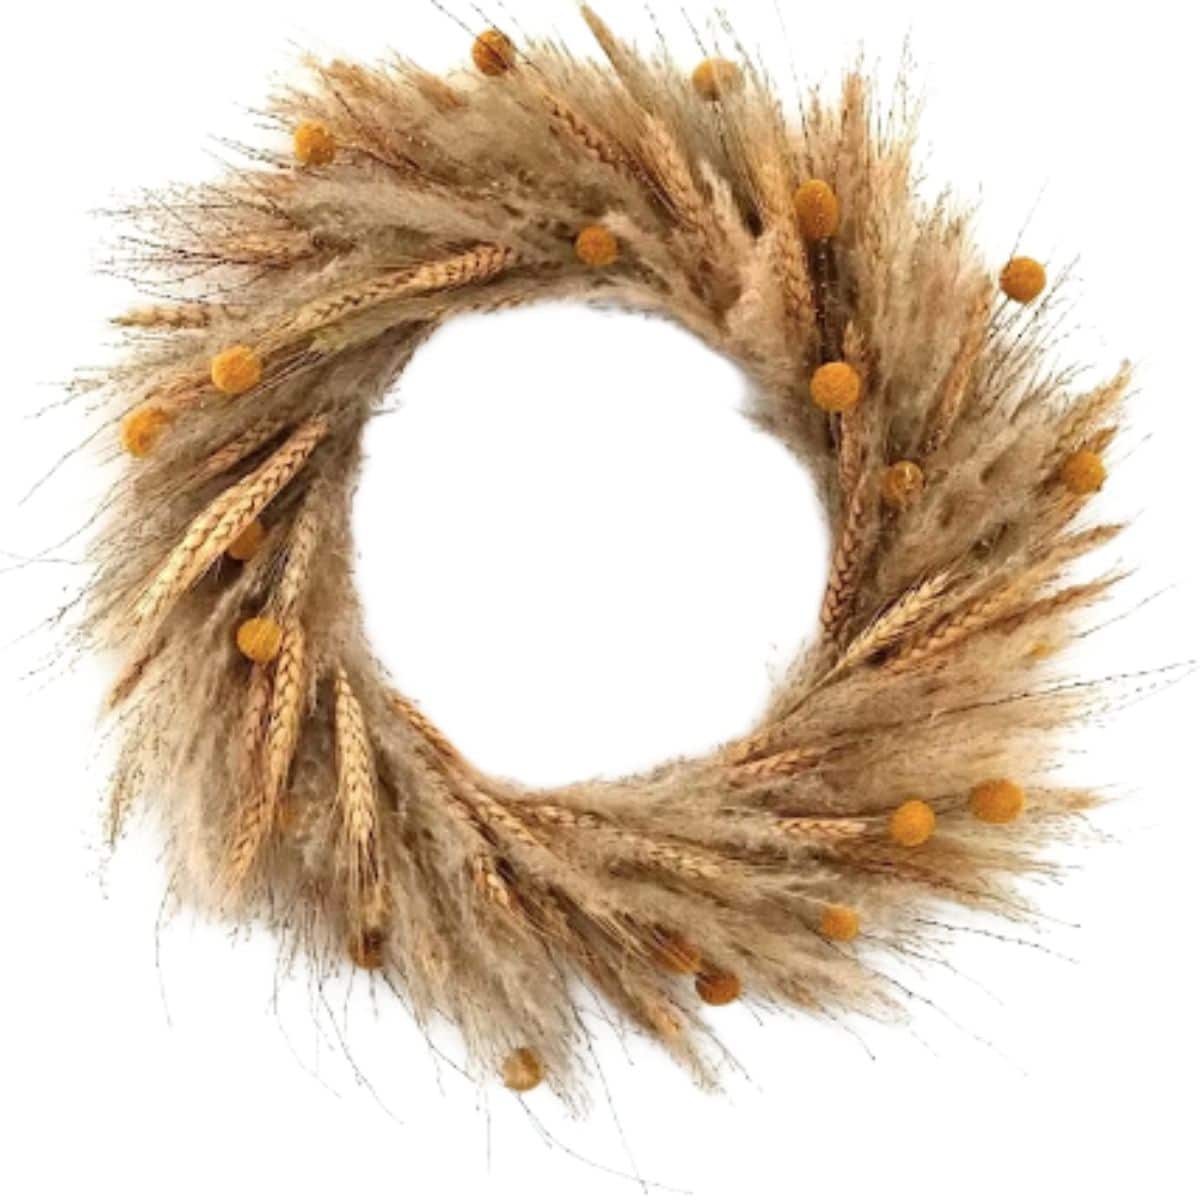 Handmade Wheat Fields Wreath in fall colors from etsy.